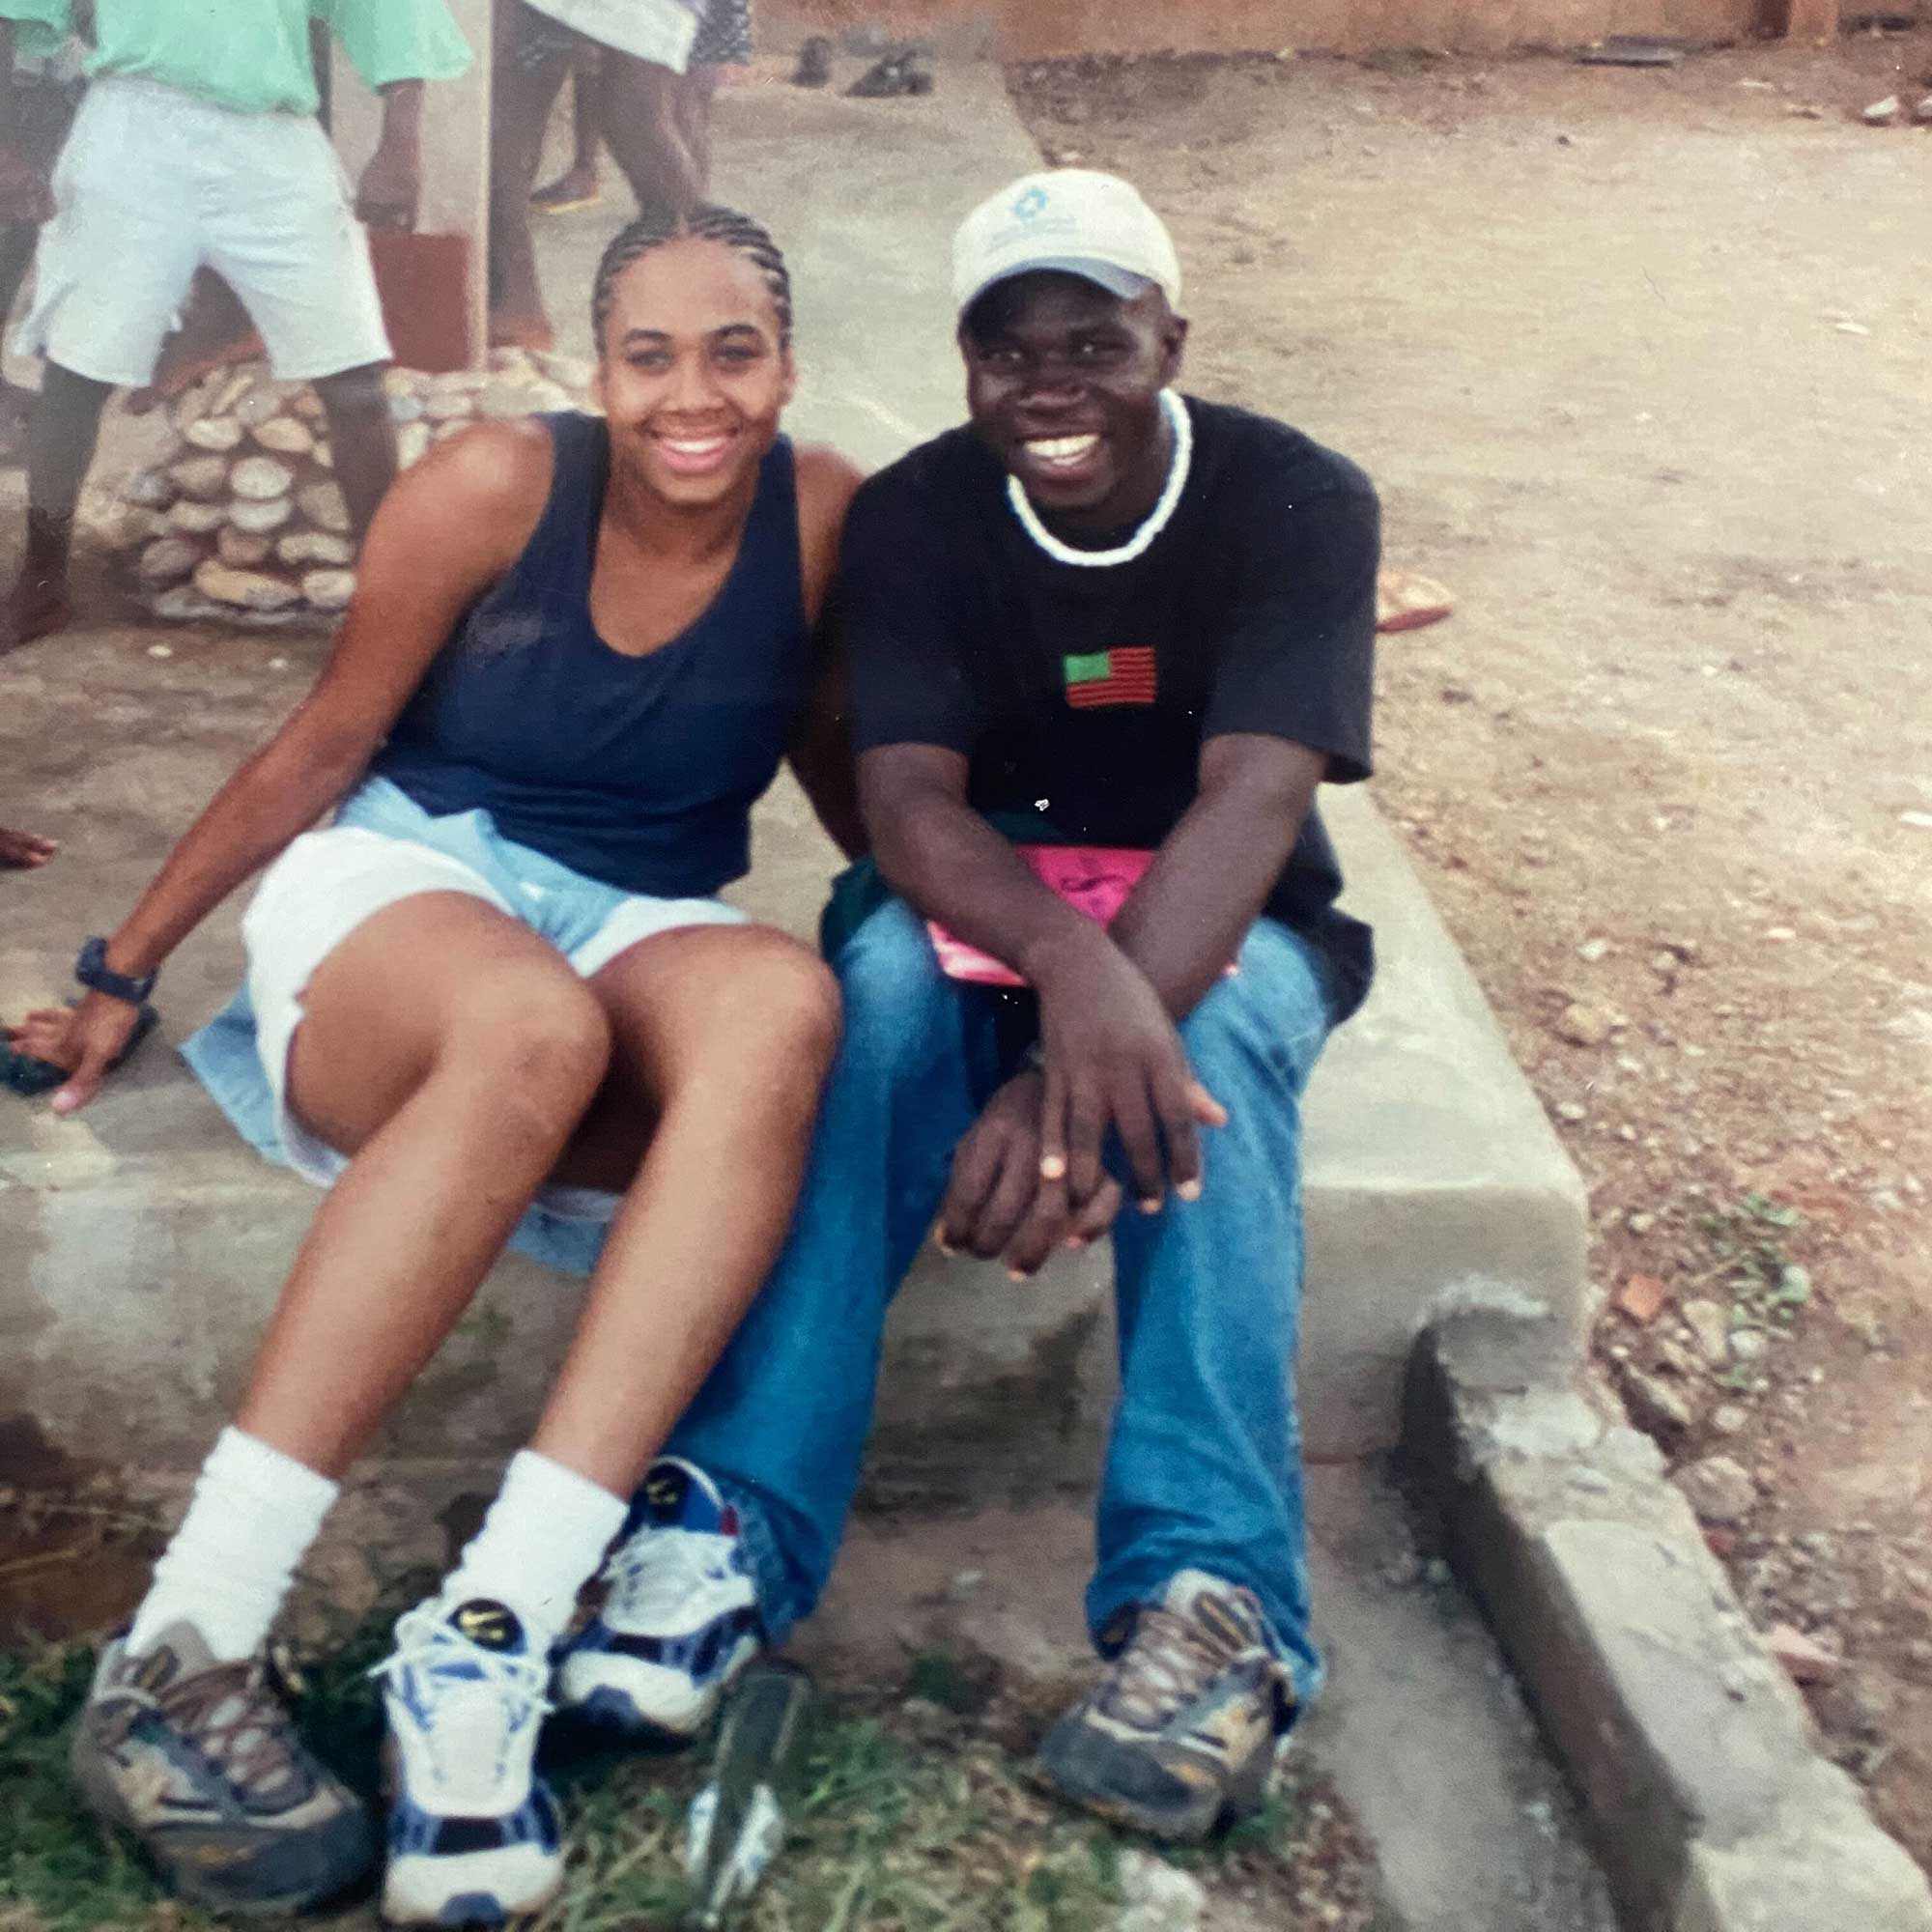 Image of Mickeeya with a friend in Ghana with swapped shoes on.